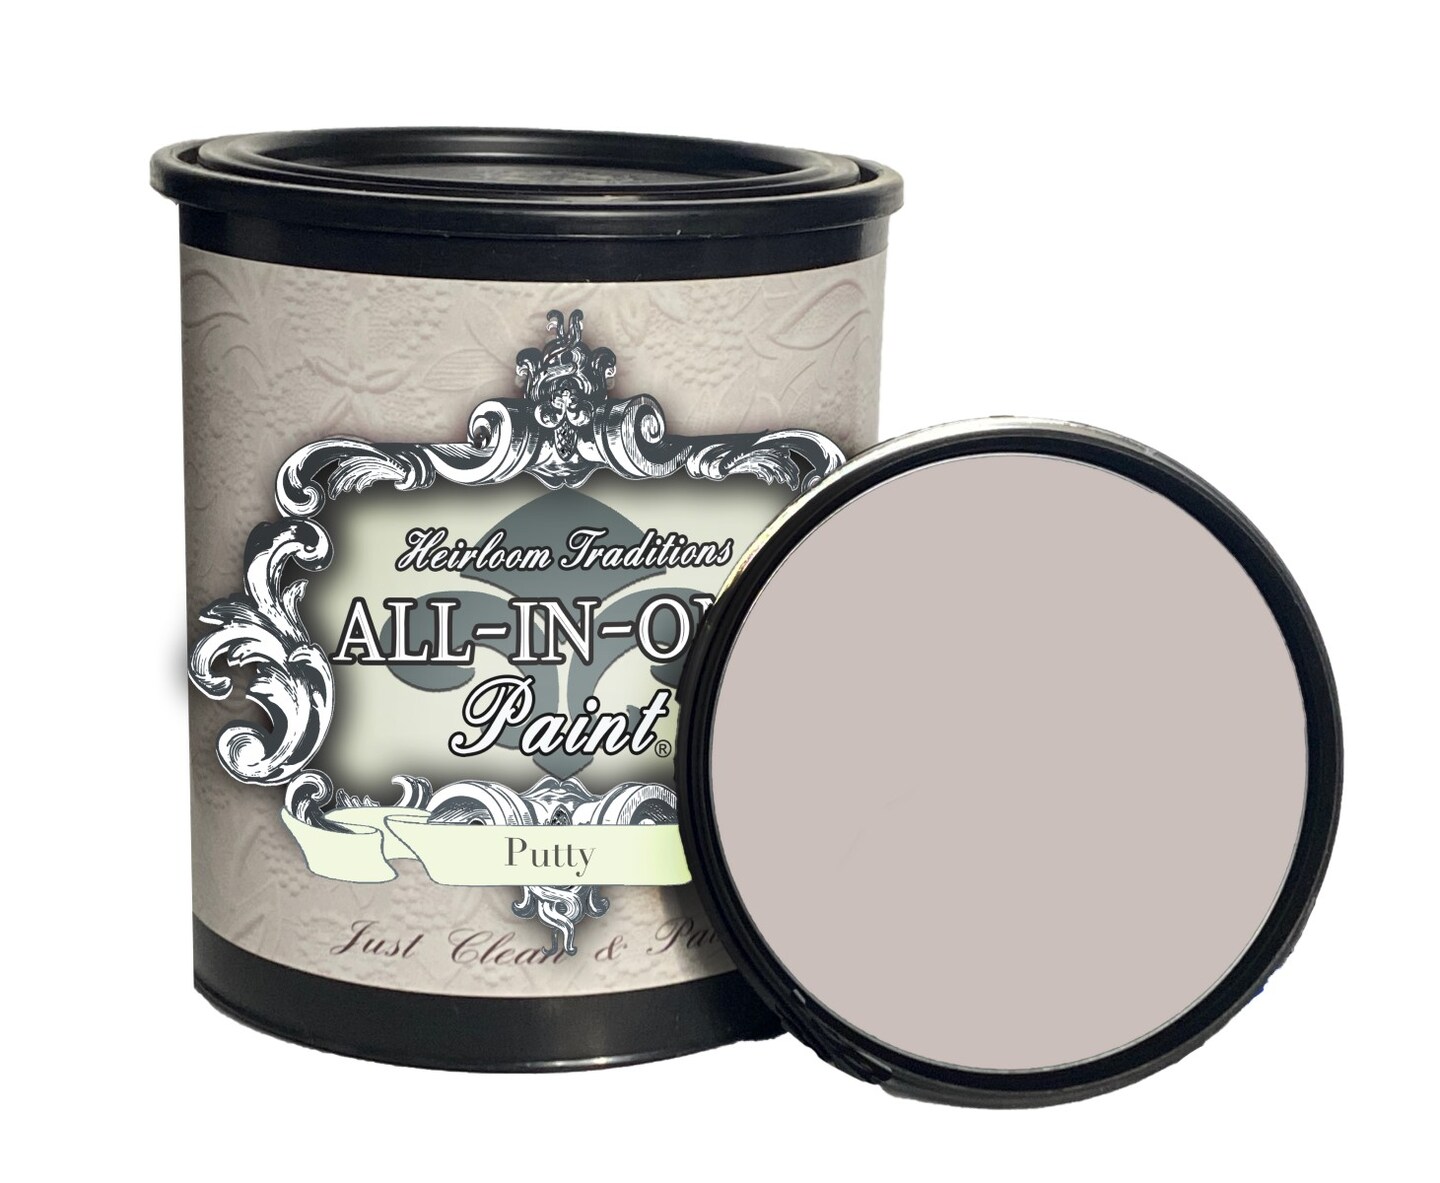 All-In-One Paint by Heirloom Traditions 